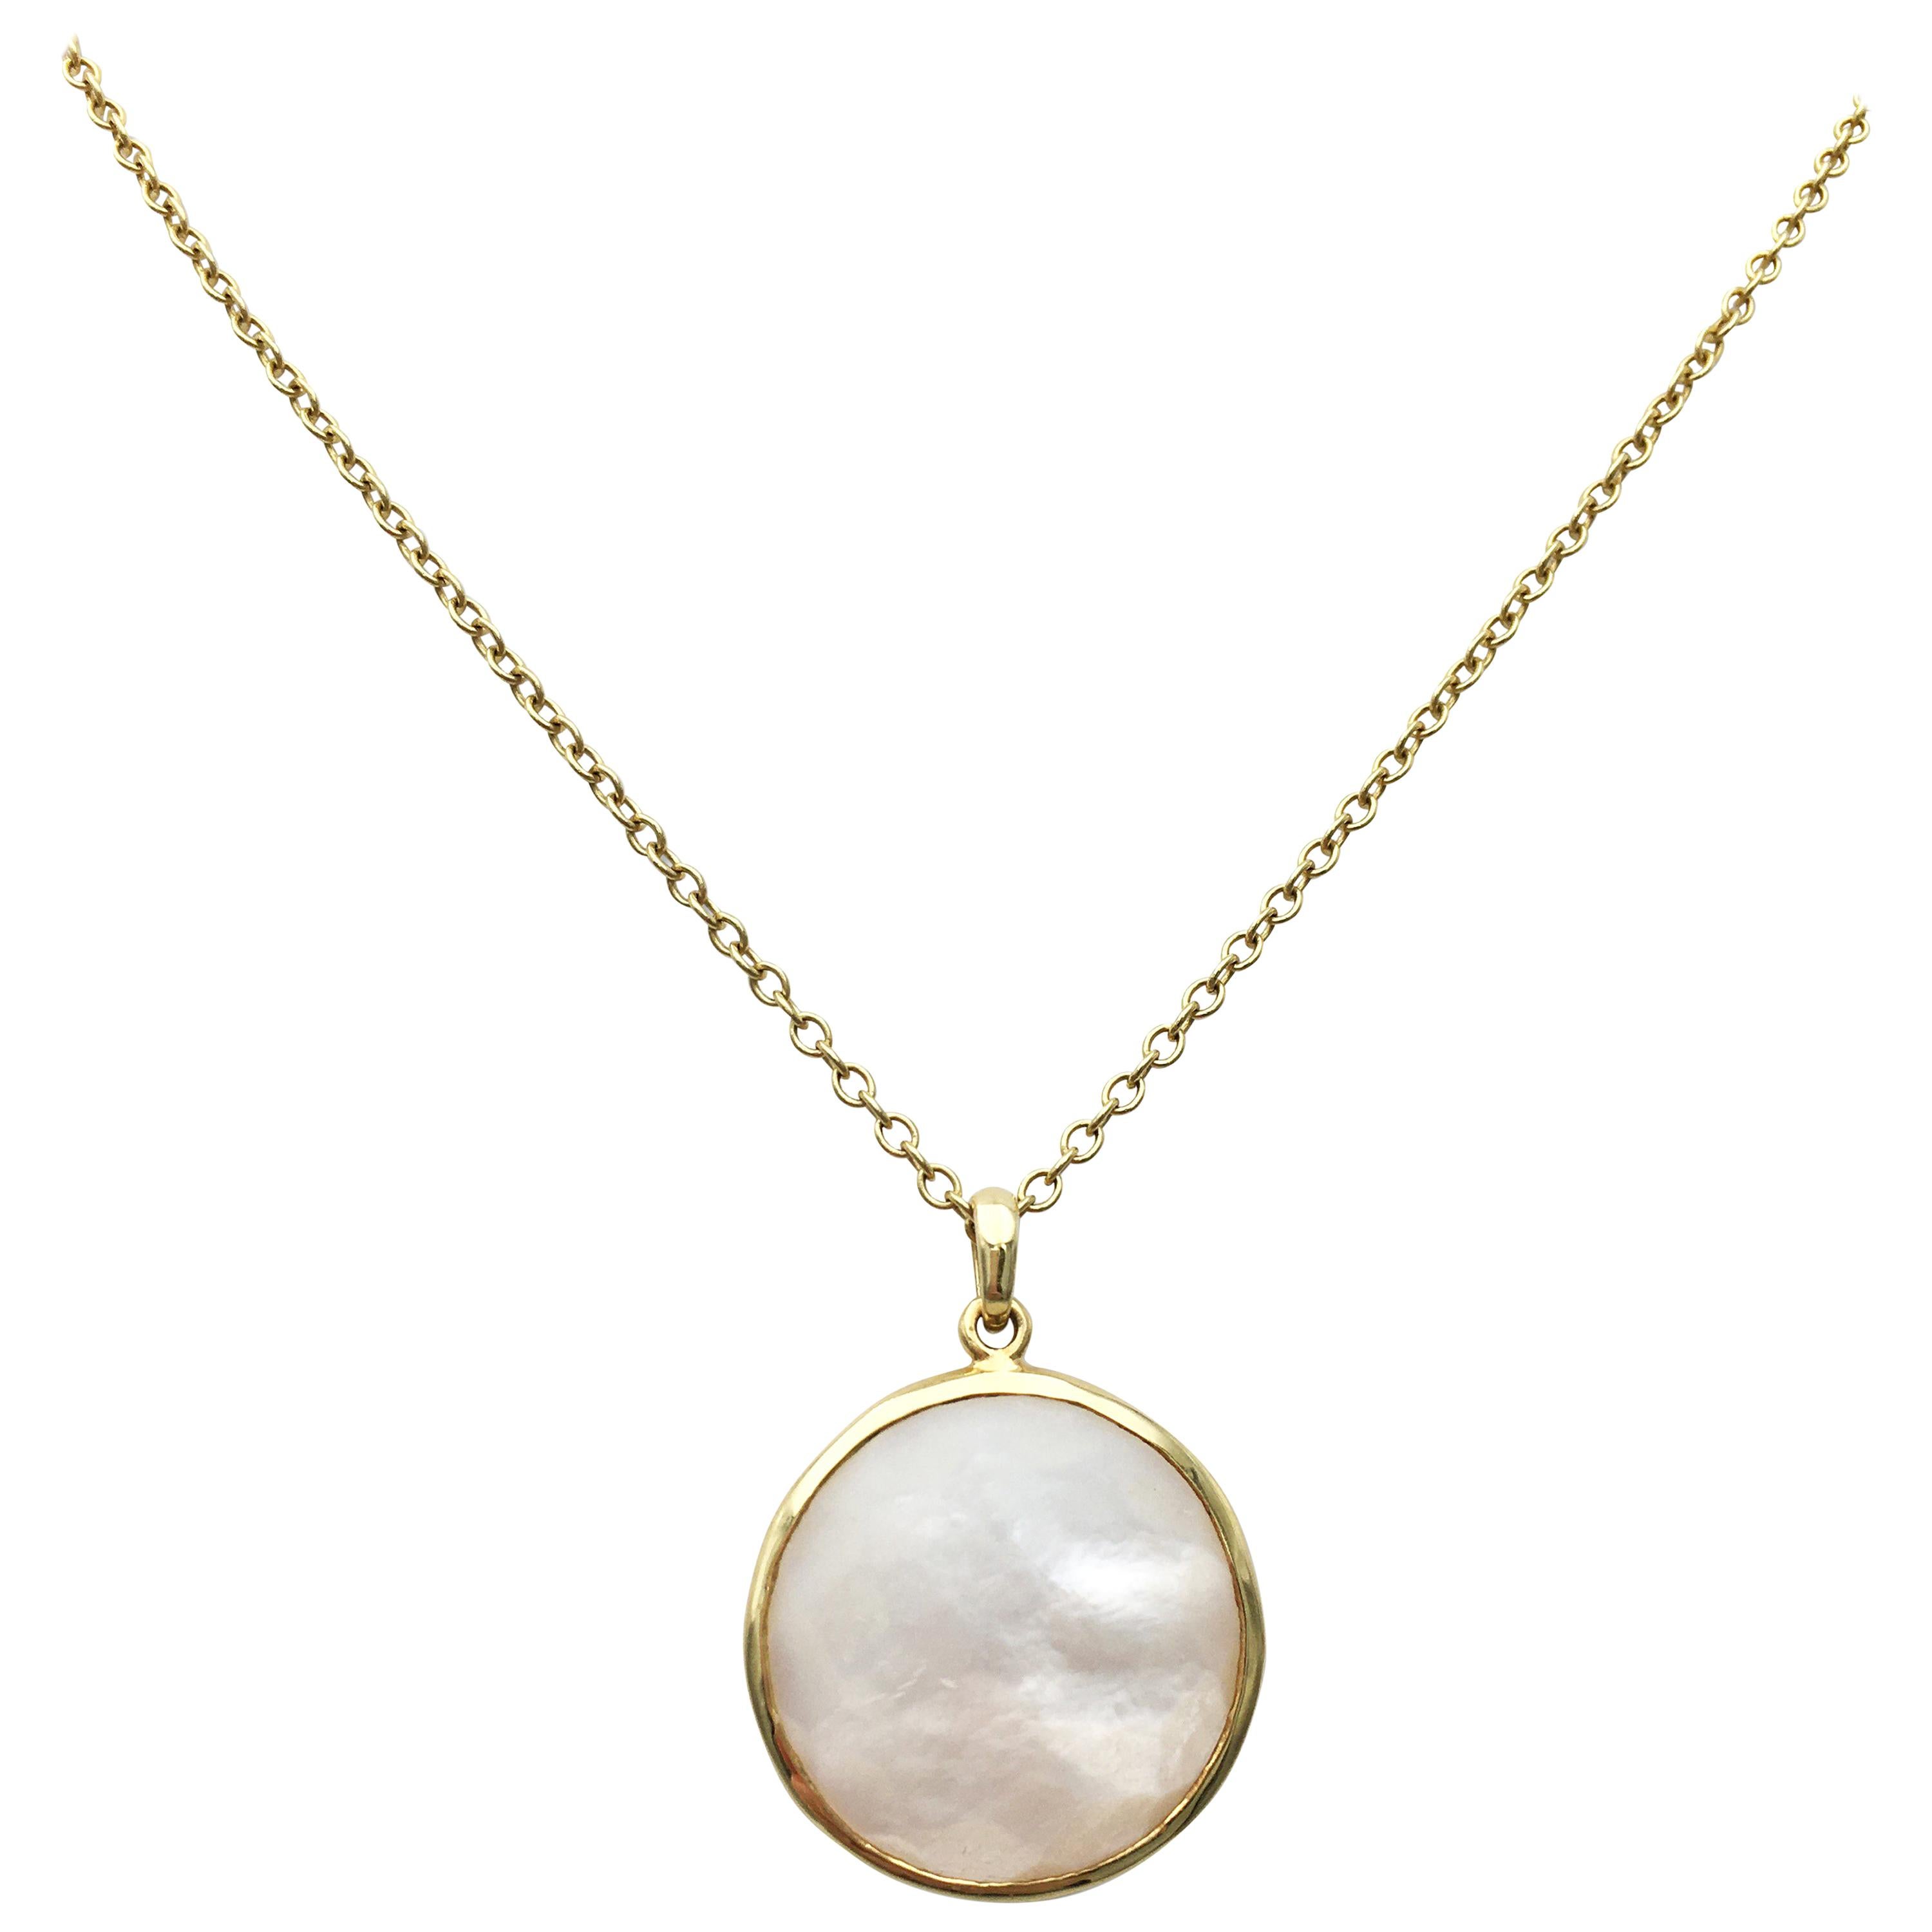 Ippolita 'Lollipop' Gold and Mother of Pearl Doublet Pendant Necklace